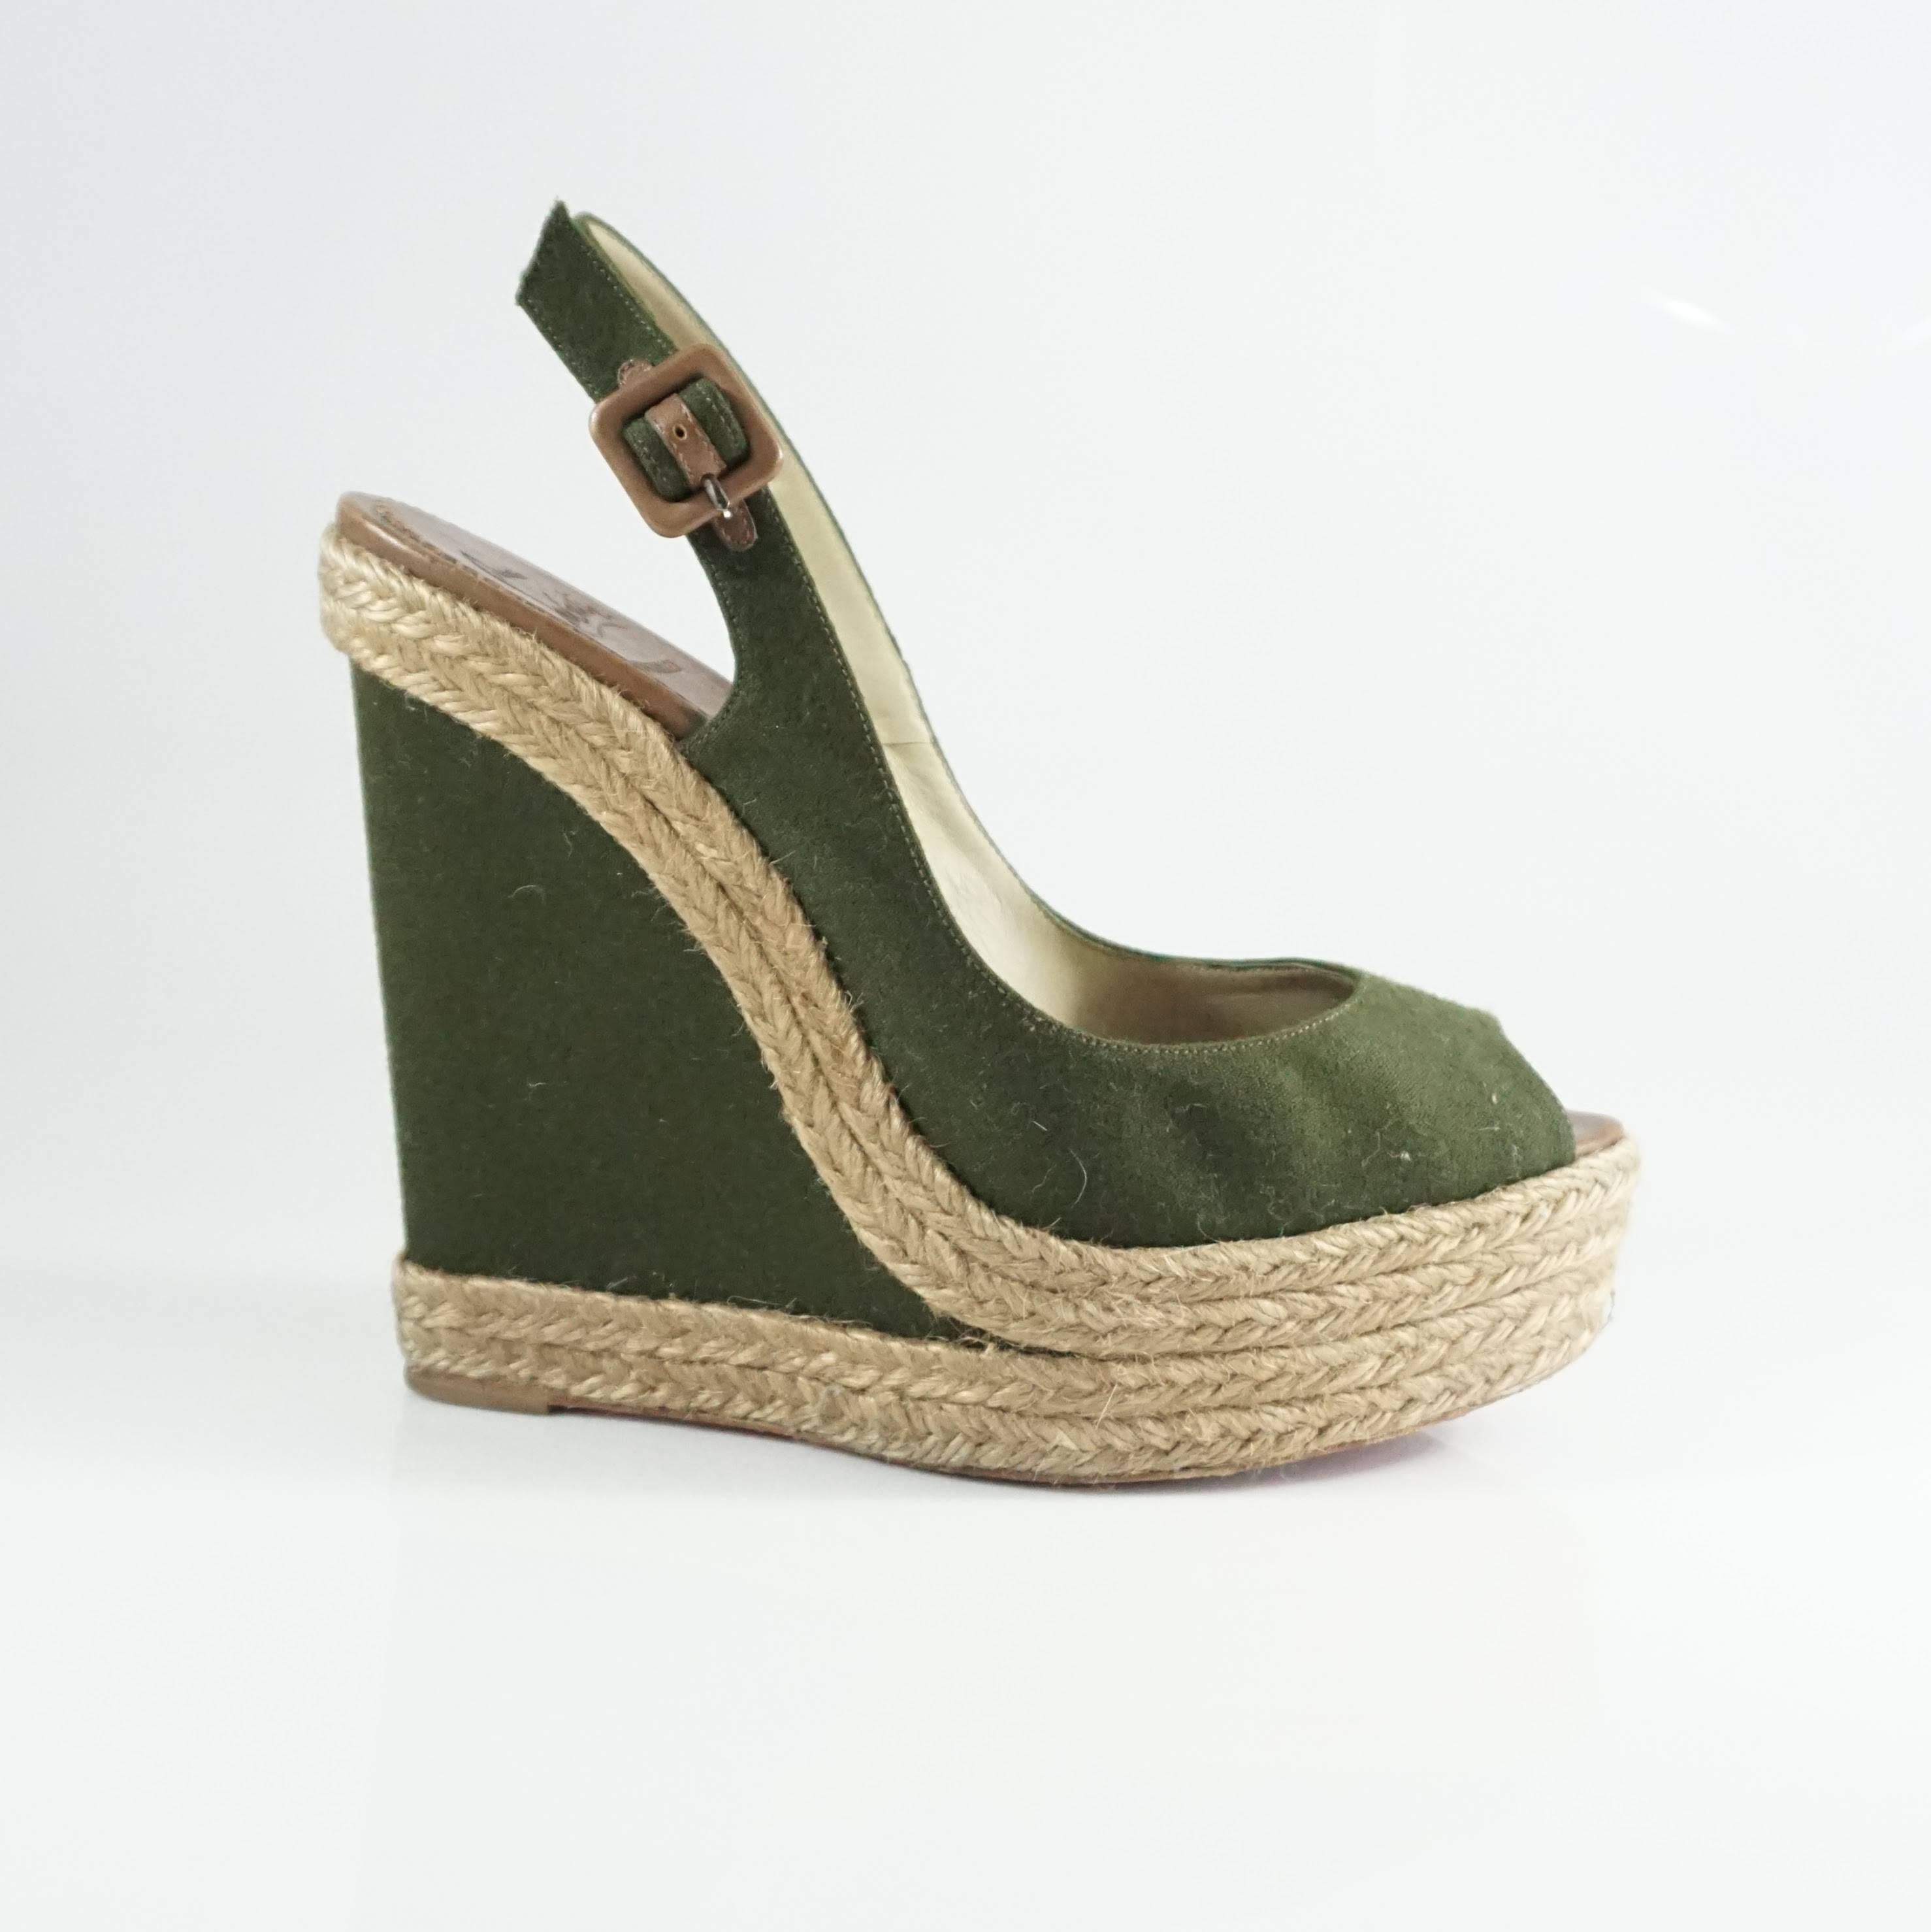 These Christian Louboutin wedges are made of green flannel and straw. They feature a green wedge with straw trim, a peep-toe, and an adjustable slingback strap. They are in very good condition with some bottom wear and some markings on the toe bed.